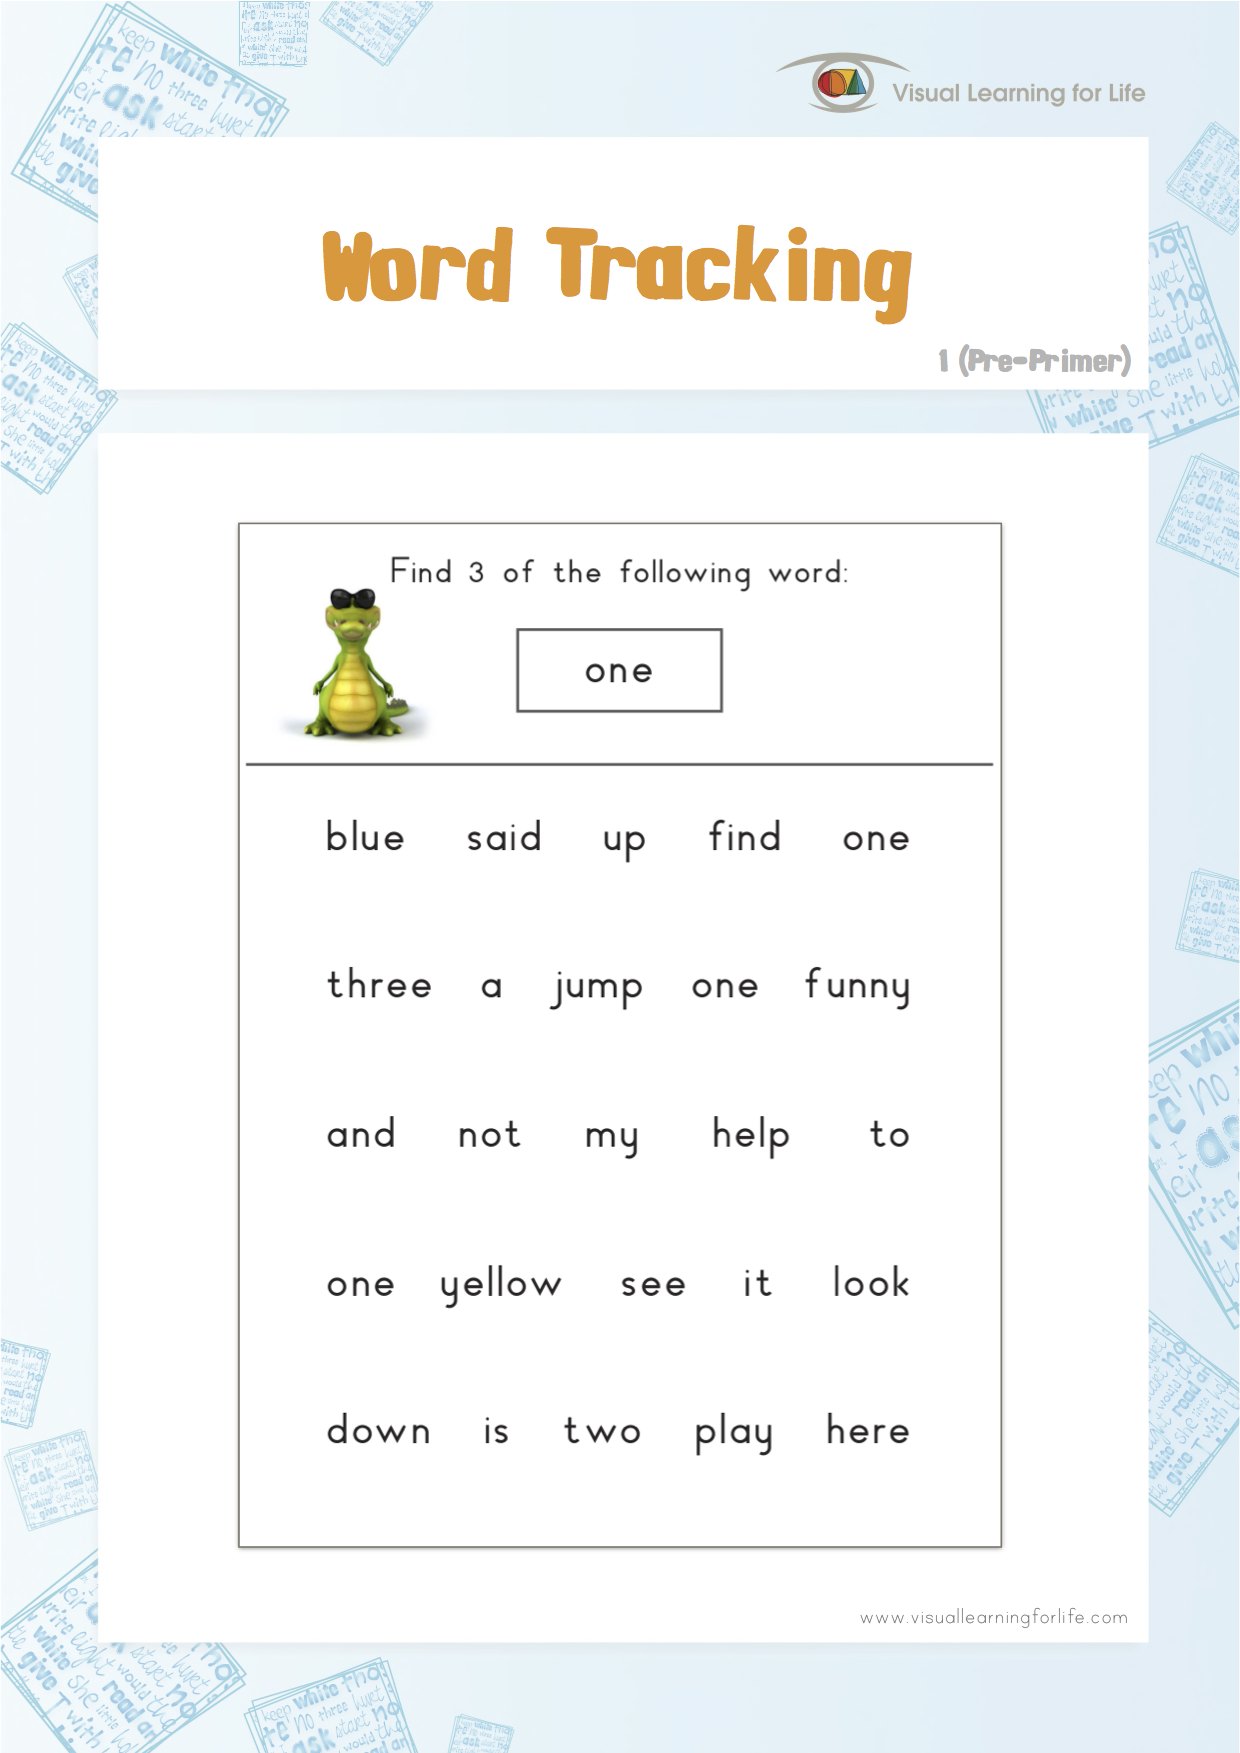 Word Tracking 1